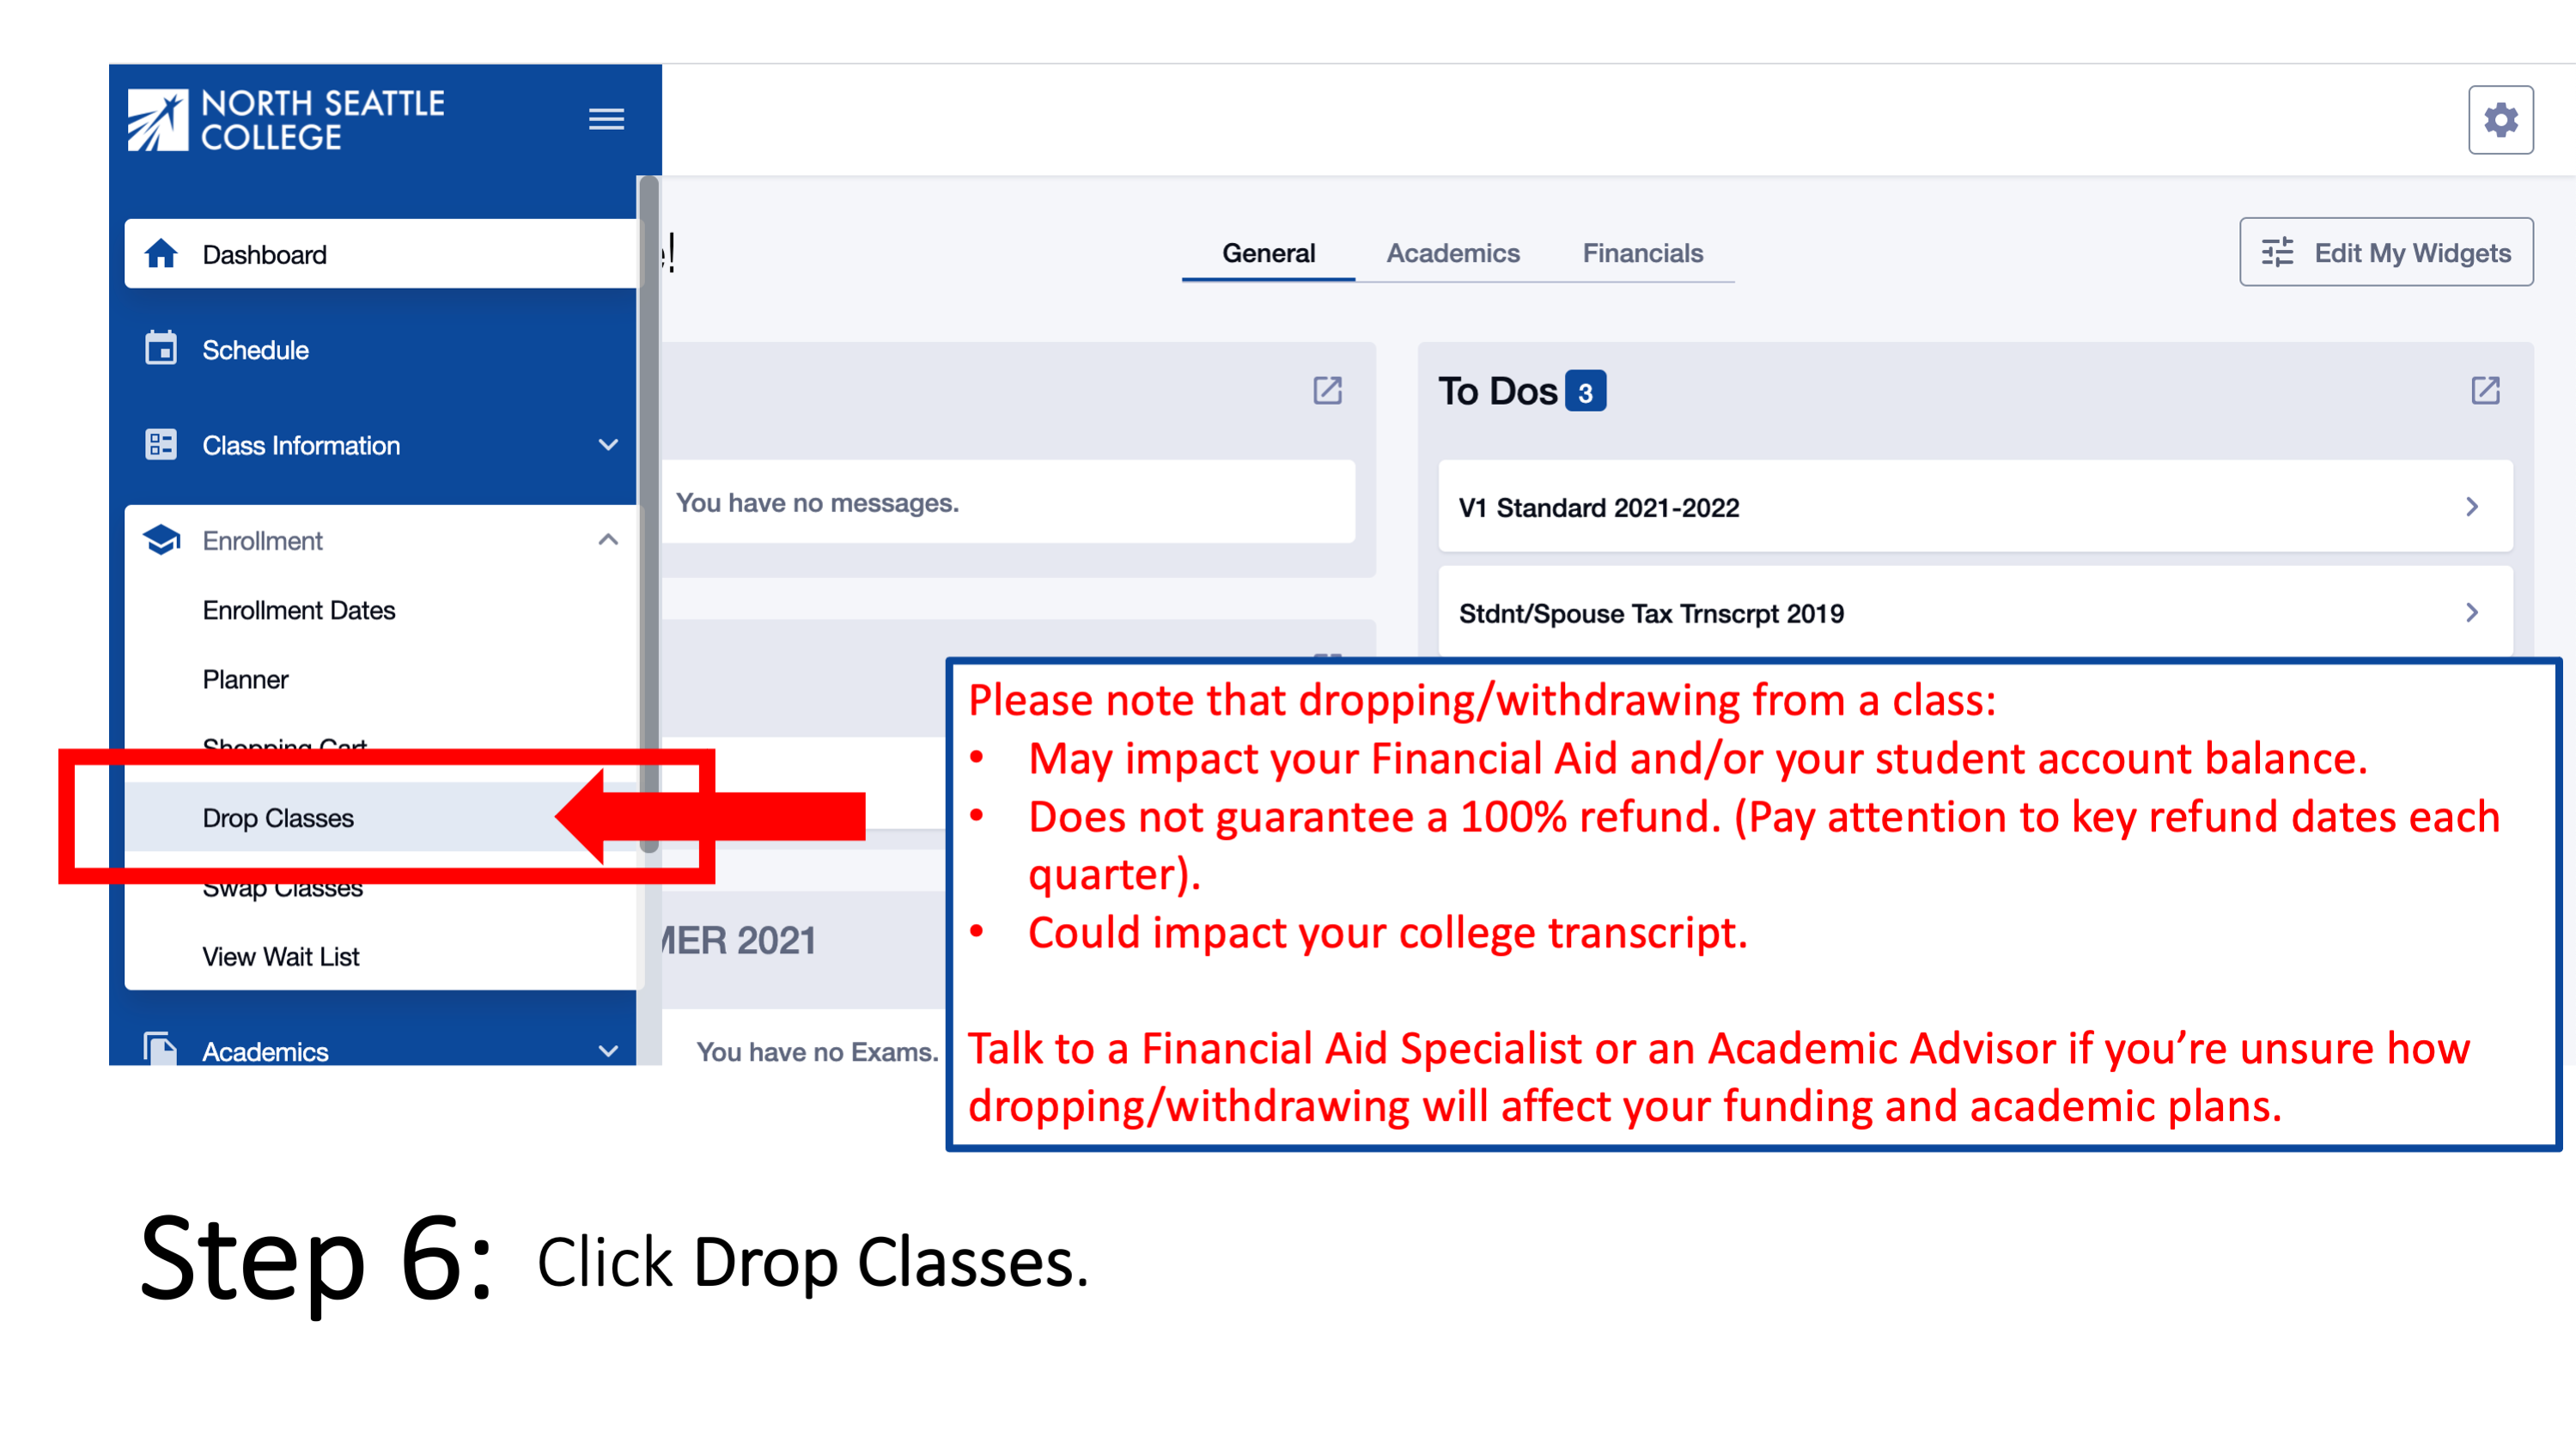 Step 6: Click Drop Classes. Please note that dropping/withdrawing from a class: may impact your Financial Aid and/or your student account balance; does not guarantee a 100% refund (Pay attention to key refund dates each quarter); could impact your official college transcript. Talk to a Financial Aid Specialist or an Academic Advisor if you’re unsure how dropping/withdrawing will affect your funding and academic plans.